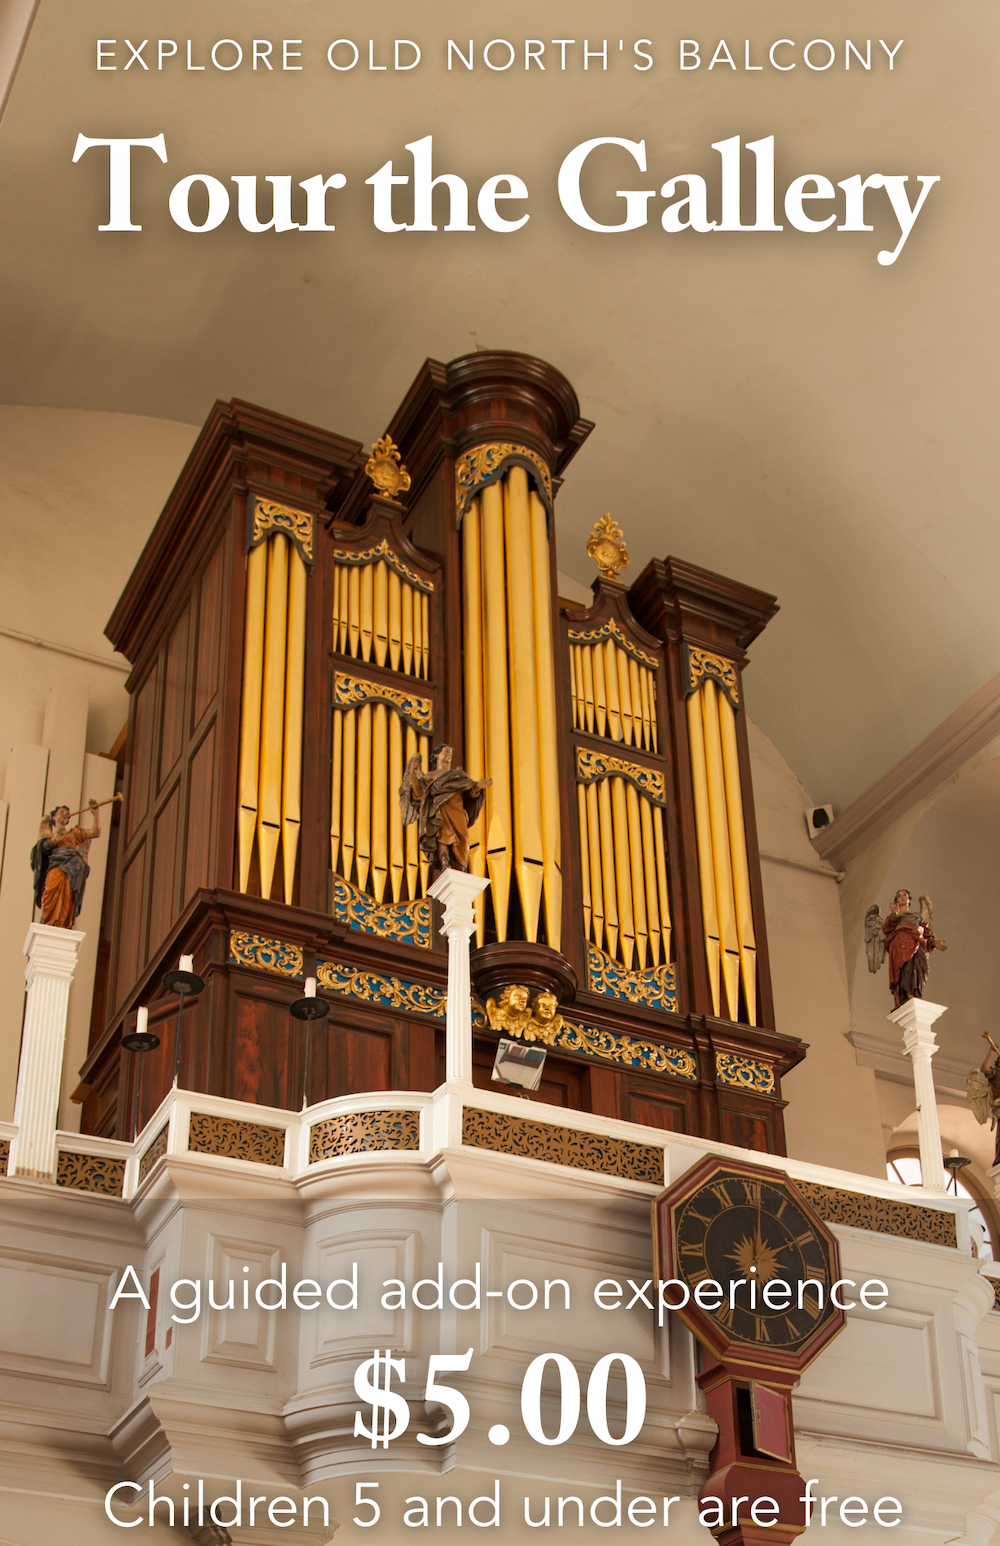 A photo of Old North Church's pipe organ and information about touring the gallery.